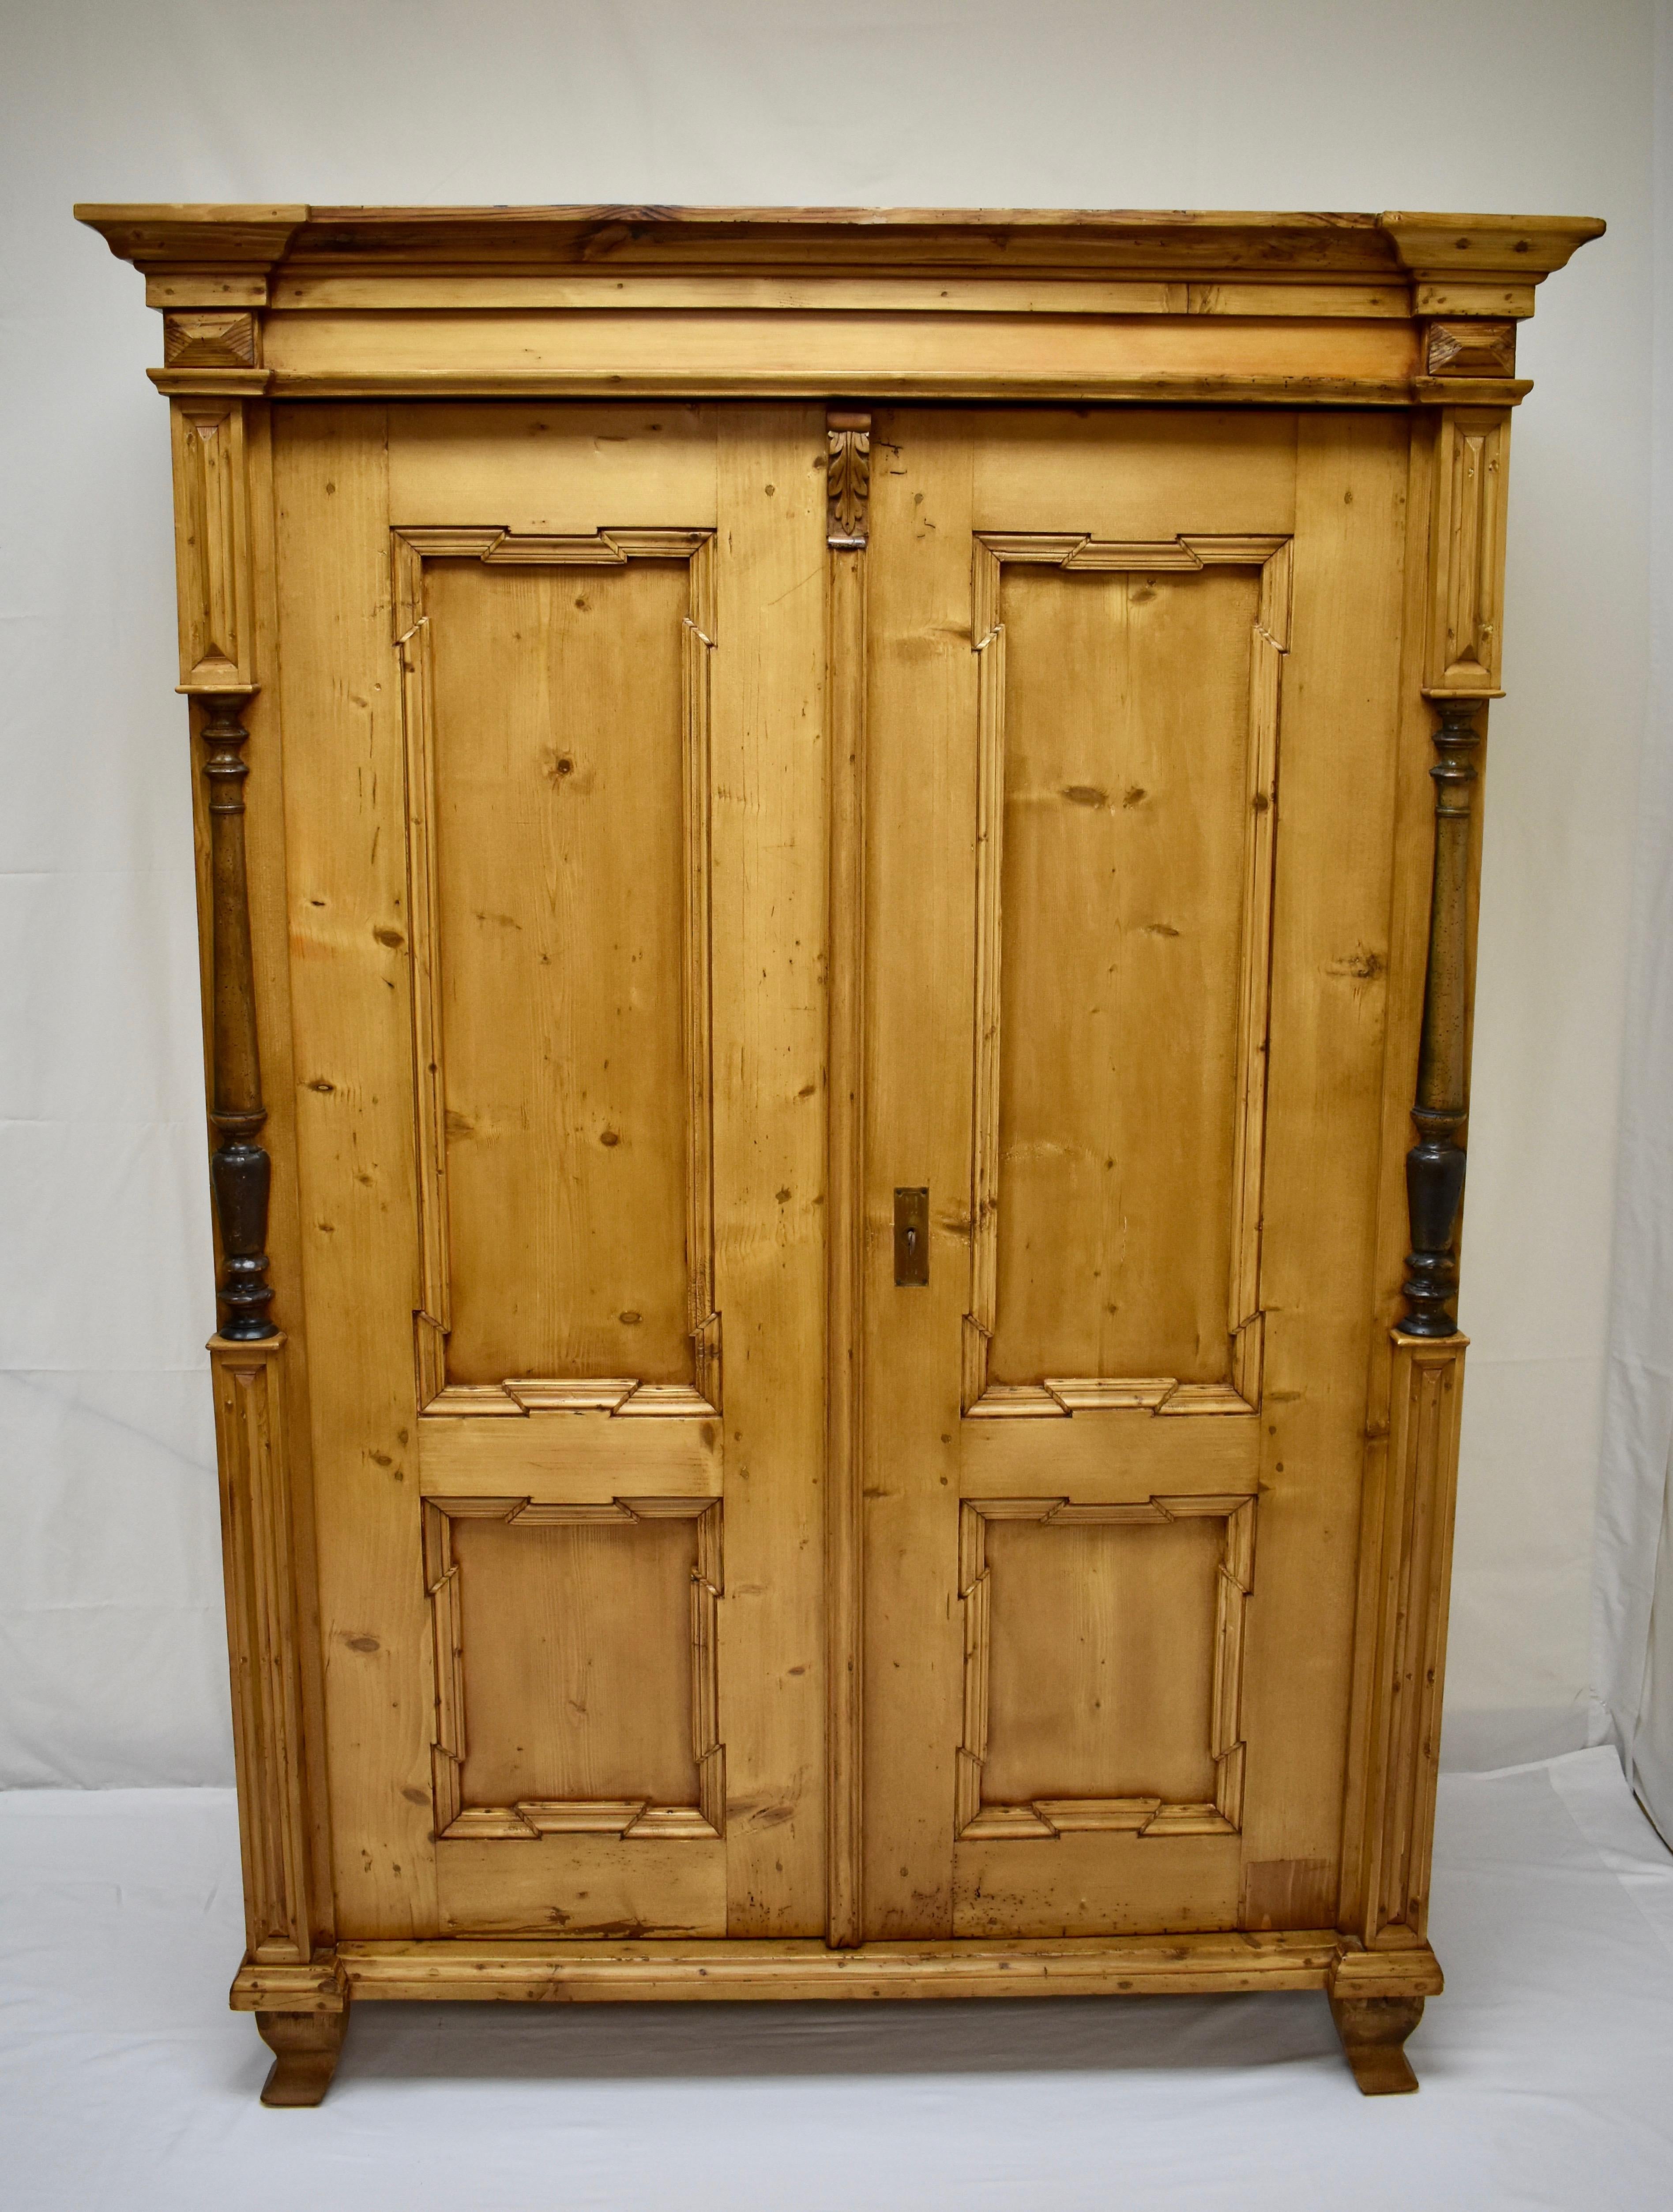 This handsome pine armoire features a bold crown molding above two doors, each with two geometric panels, separated by a fluted strip capped with a hand-carved acanthus leaf corbel. The front corners are decorated with ebonised beechwood split